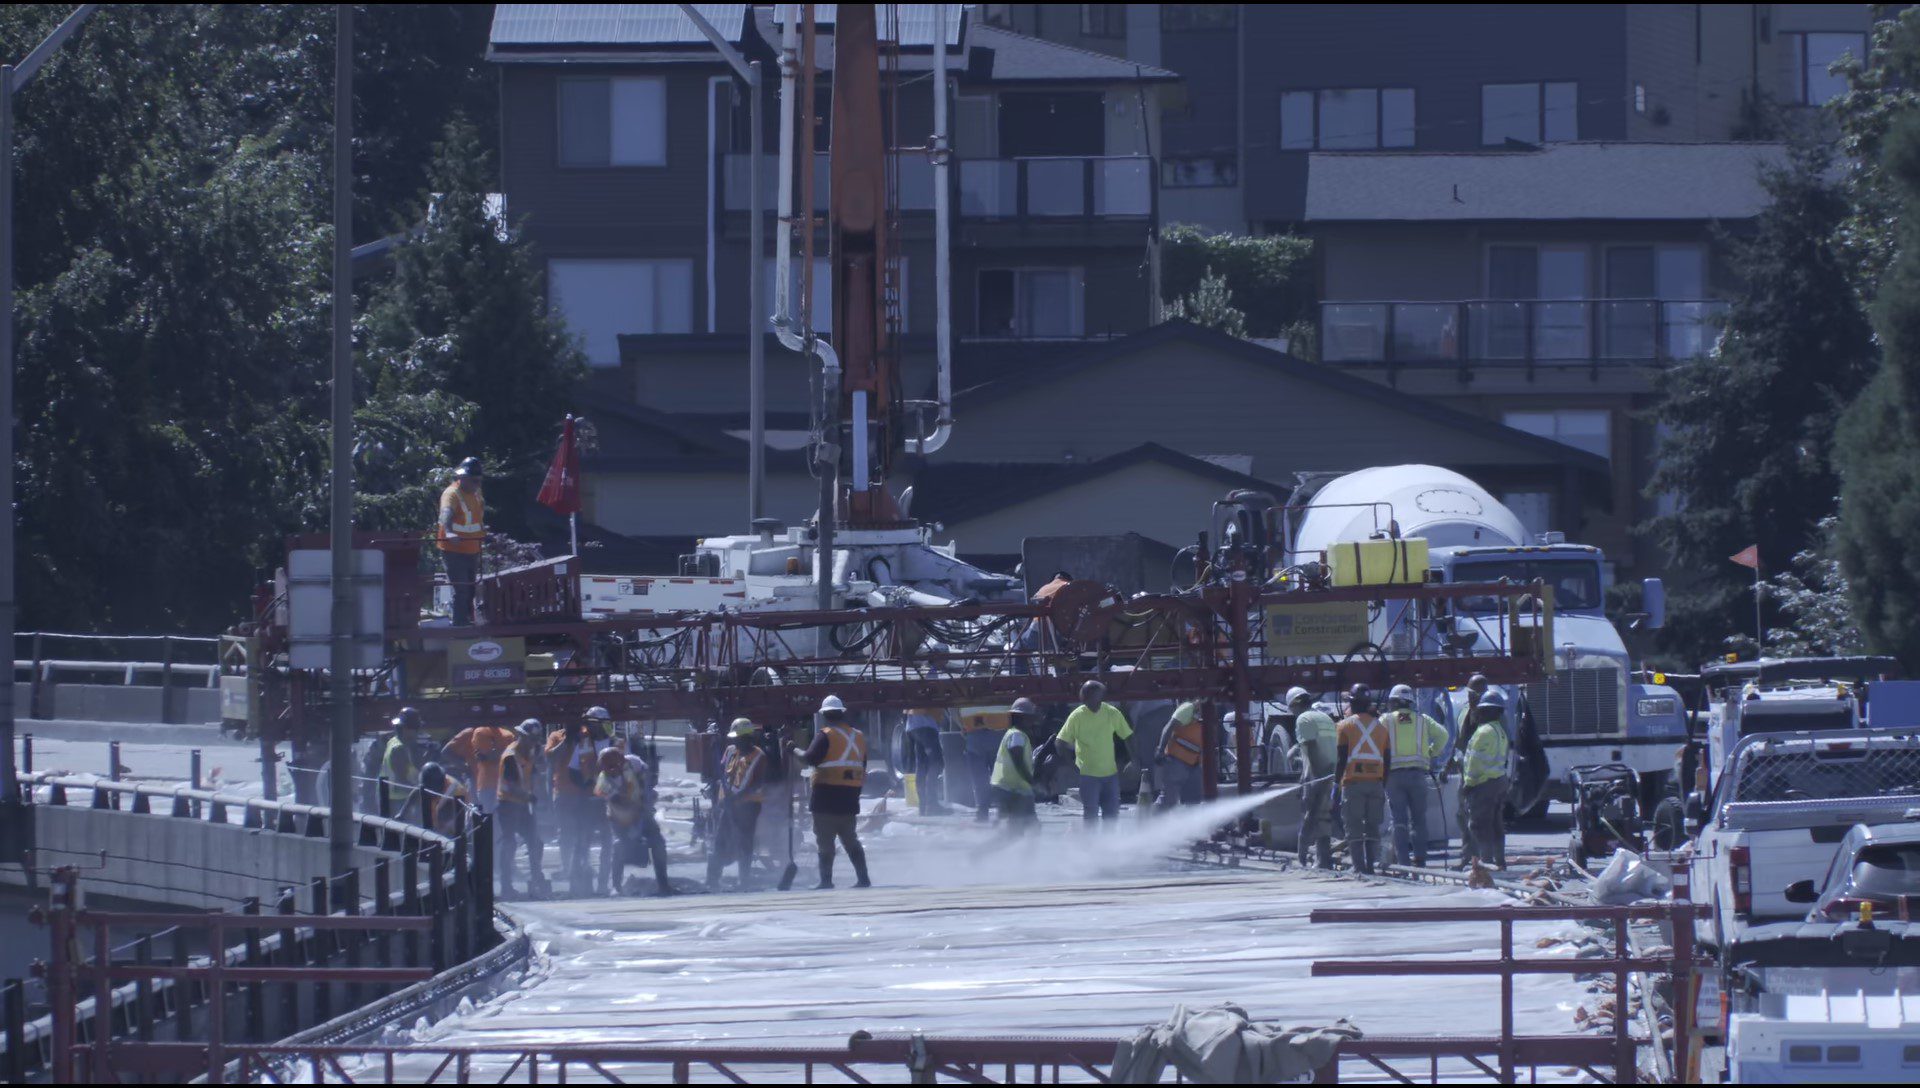 Numerous construction workers on the Fauntleroy Expressway, as part of a concrete overlay effort. Large construction equipment and machinery is in the center of the photo, with a large building in the background.